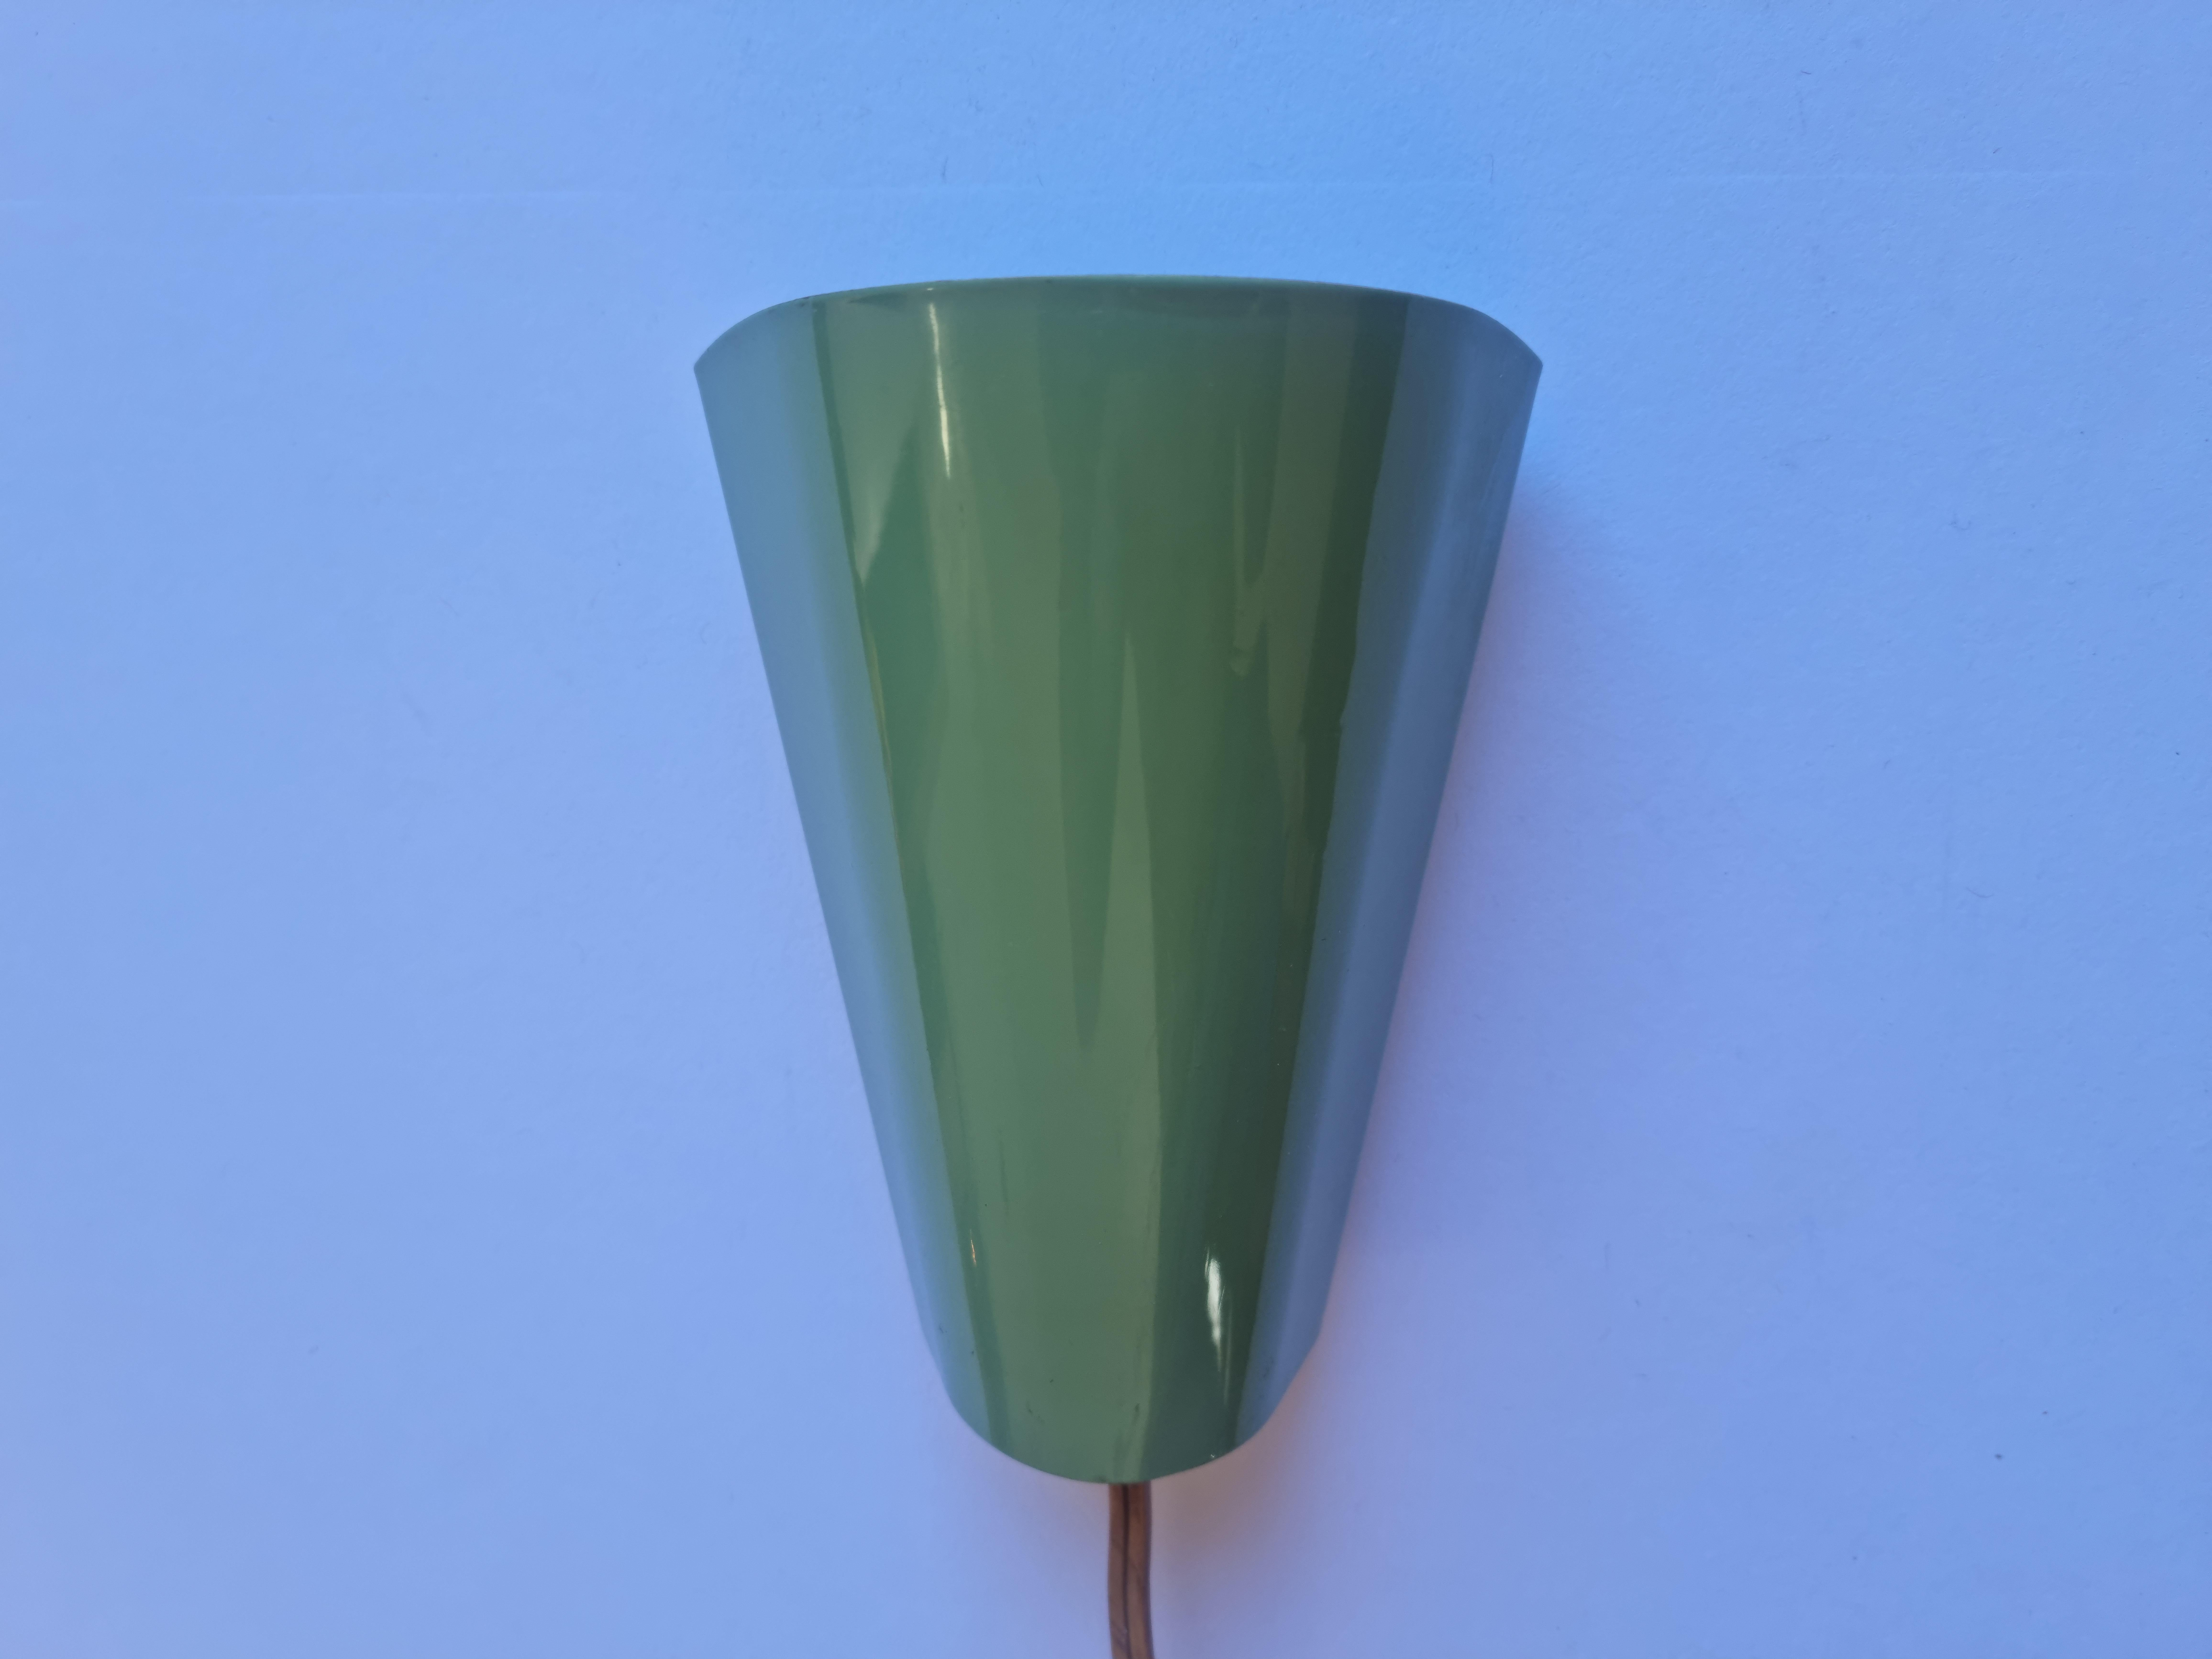 Lacquered Midcentury Rare Wall Lamp Lidokov, Designed by Josef Hurka, 1960s For Sale